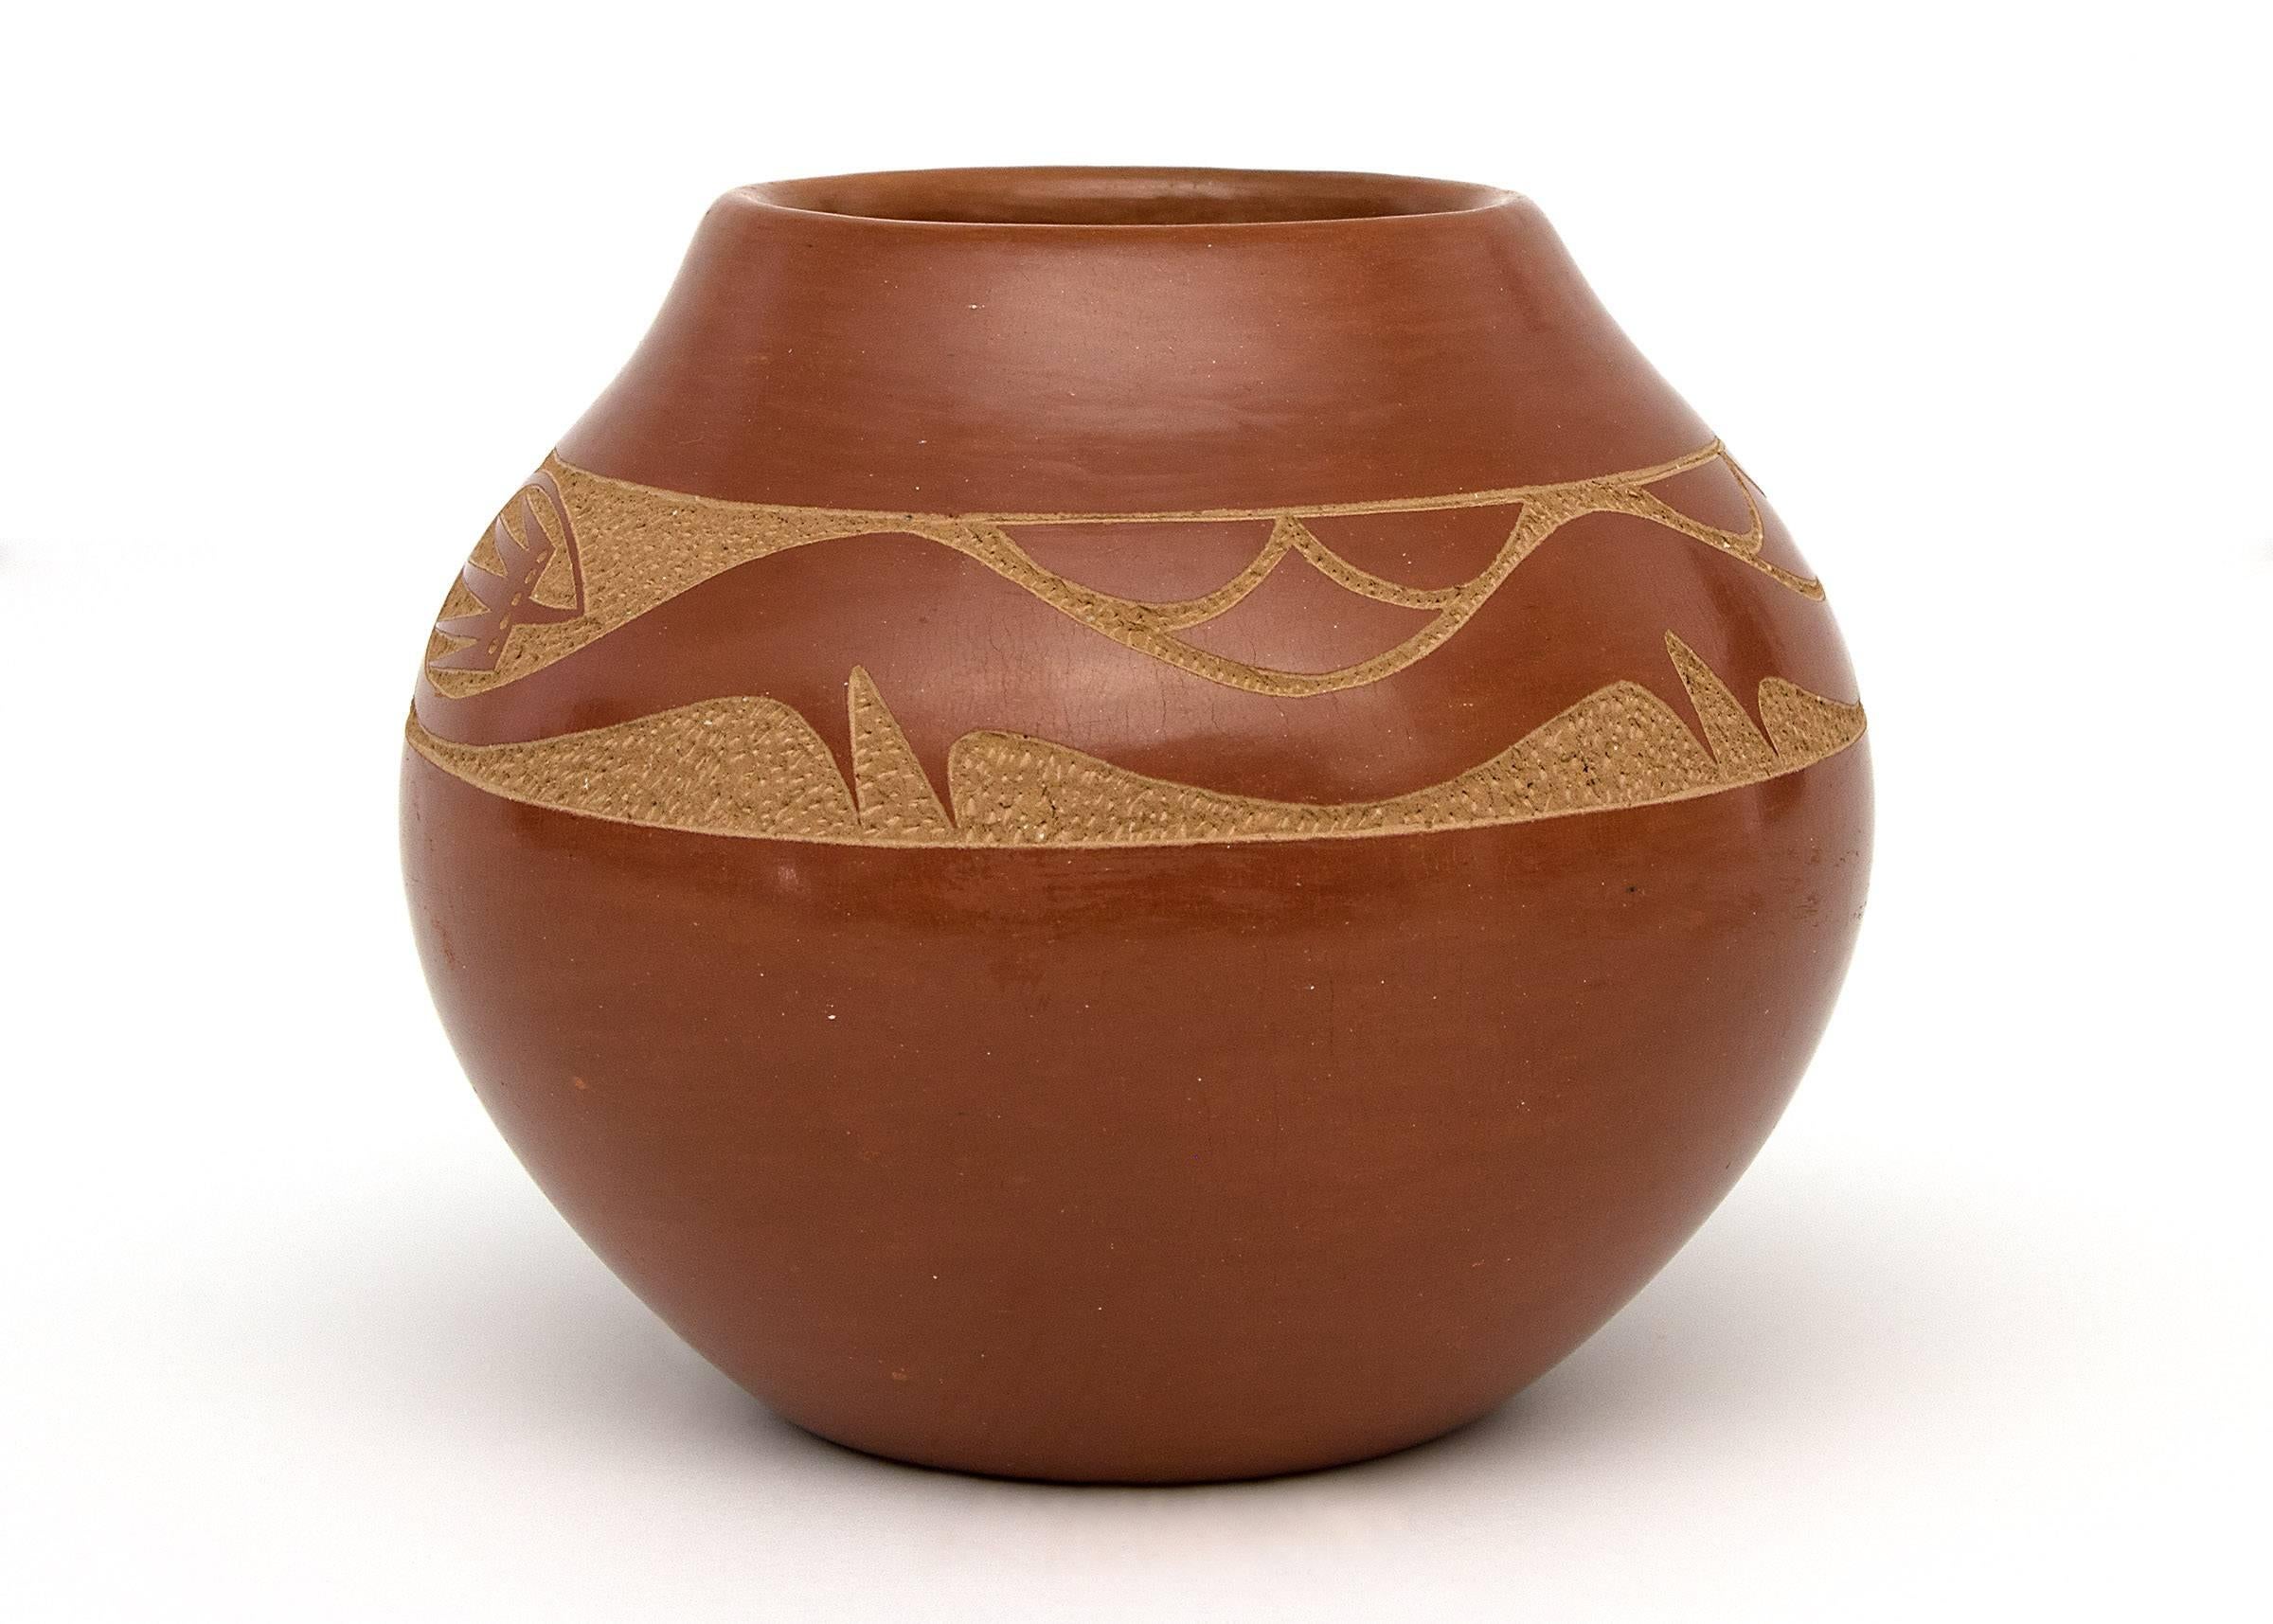 A redware olla with a sgraffito/incised Avanyu water serpent by San Ildefonso potter, Tony Da, Thun-Phoe-She (Sun Dew). Earthenware with slip glazes, signed on base by the artist.

Olla is in very good condition - please contact us for a detailed